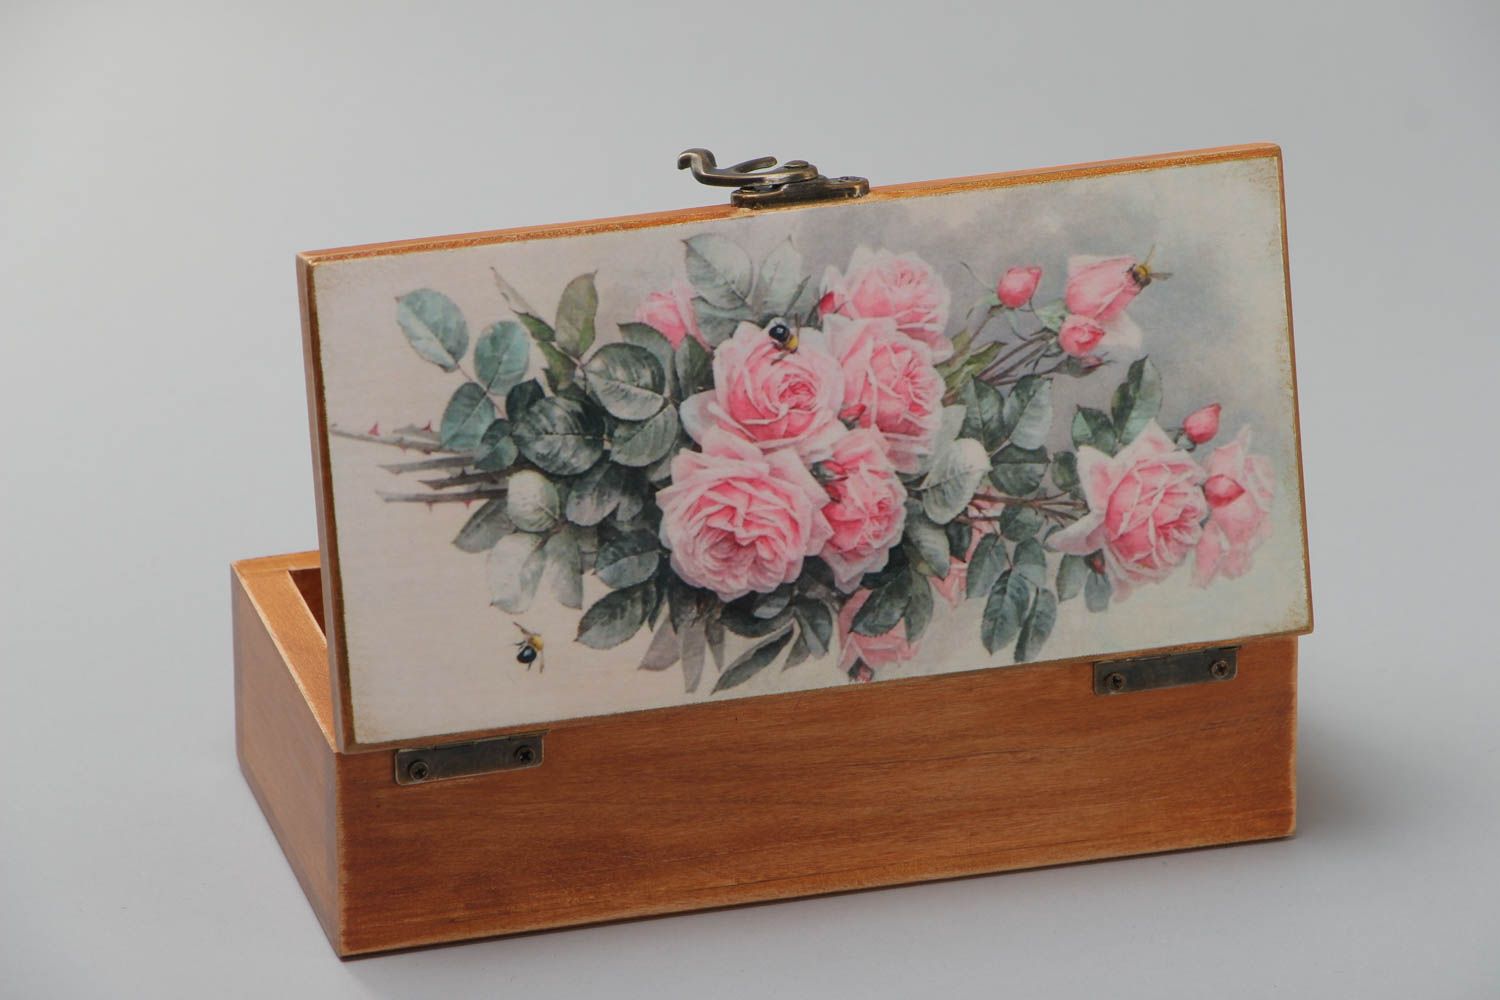 Handmade rectangular wooden jewelry box with floral print on a lid photo 2